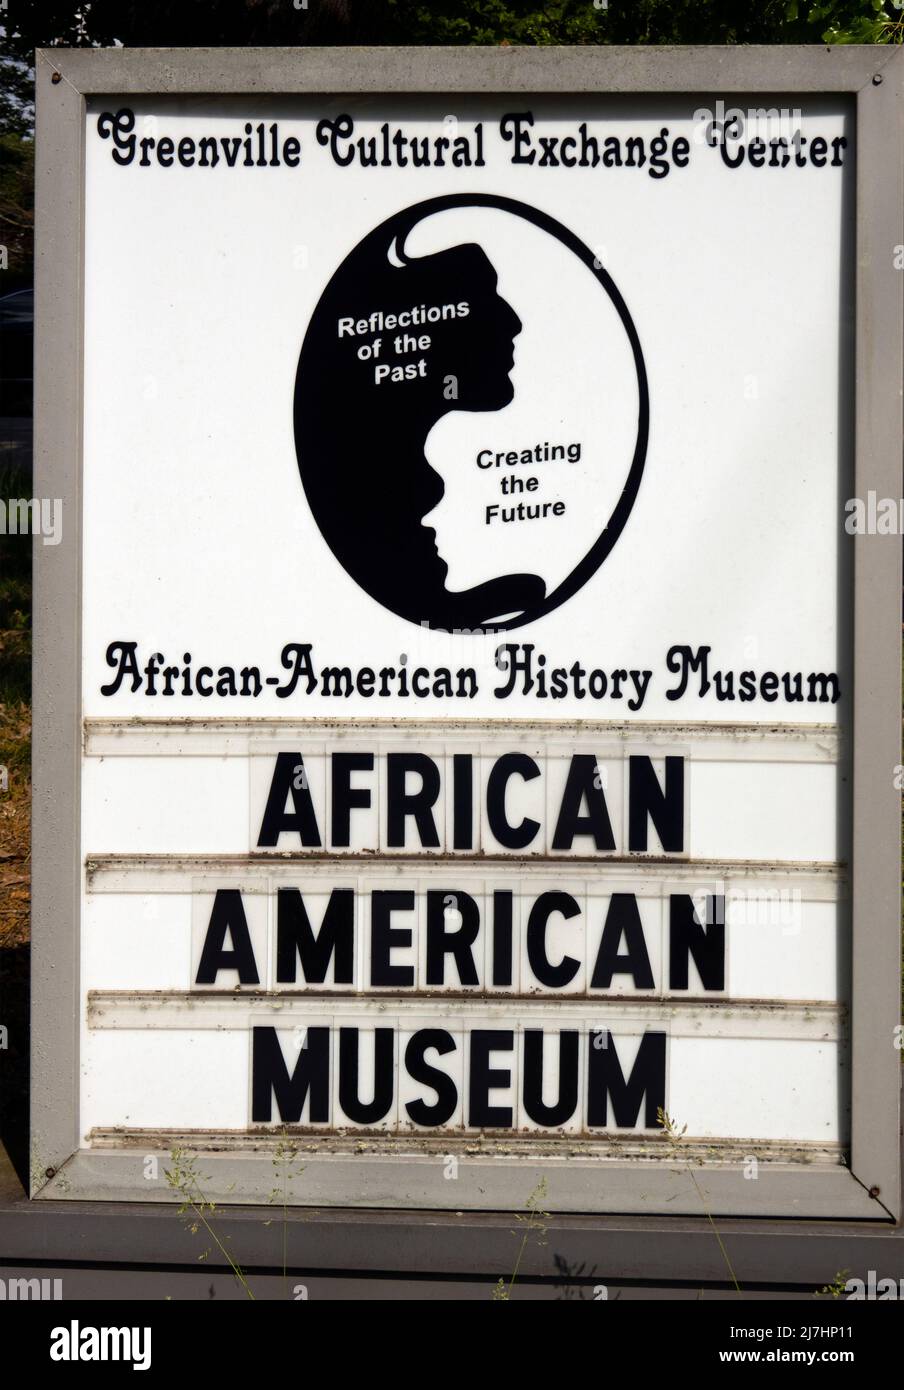 Greenville cultural exchange is an African American history museum in Greenville SC Stock Photo